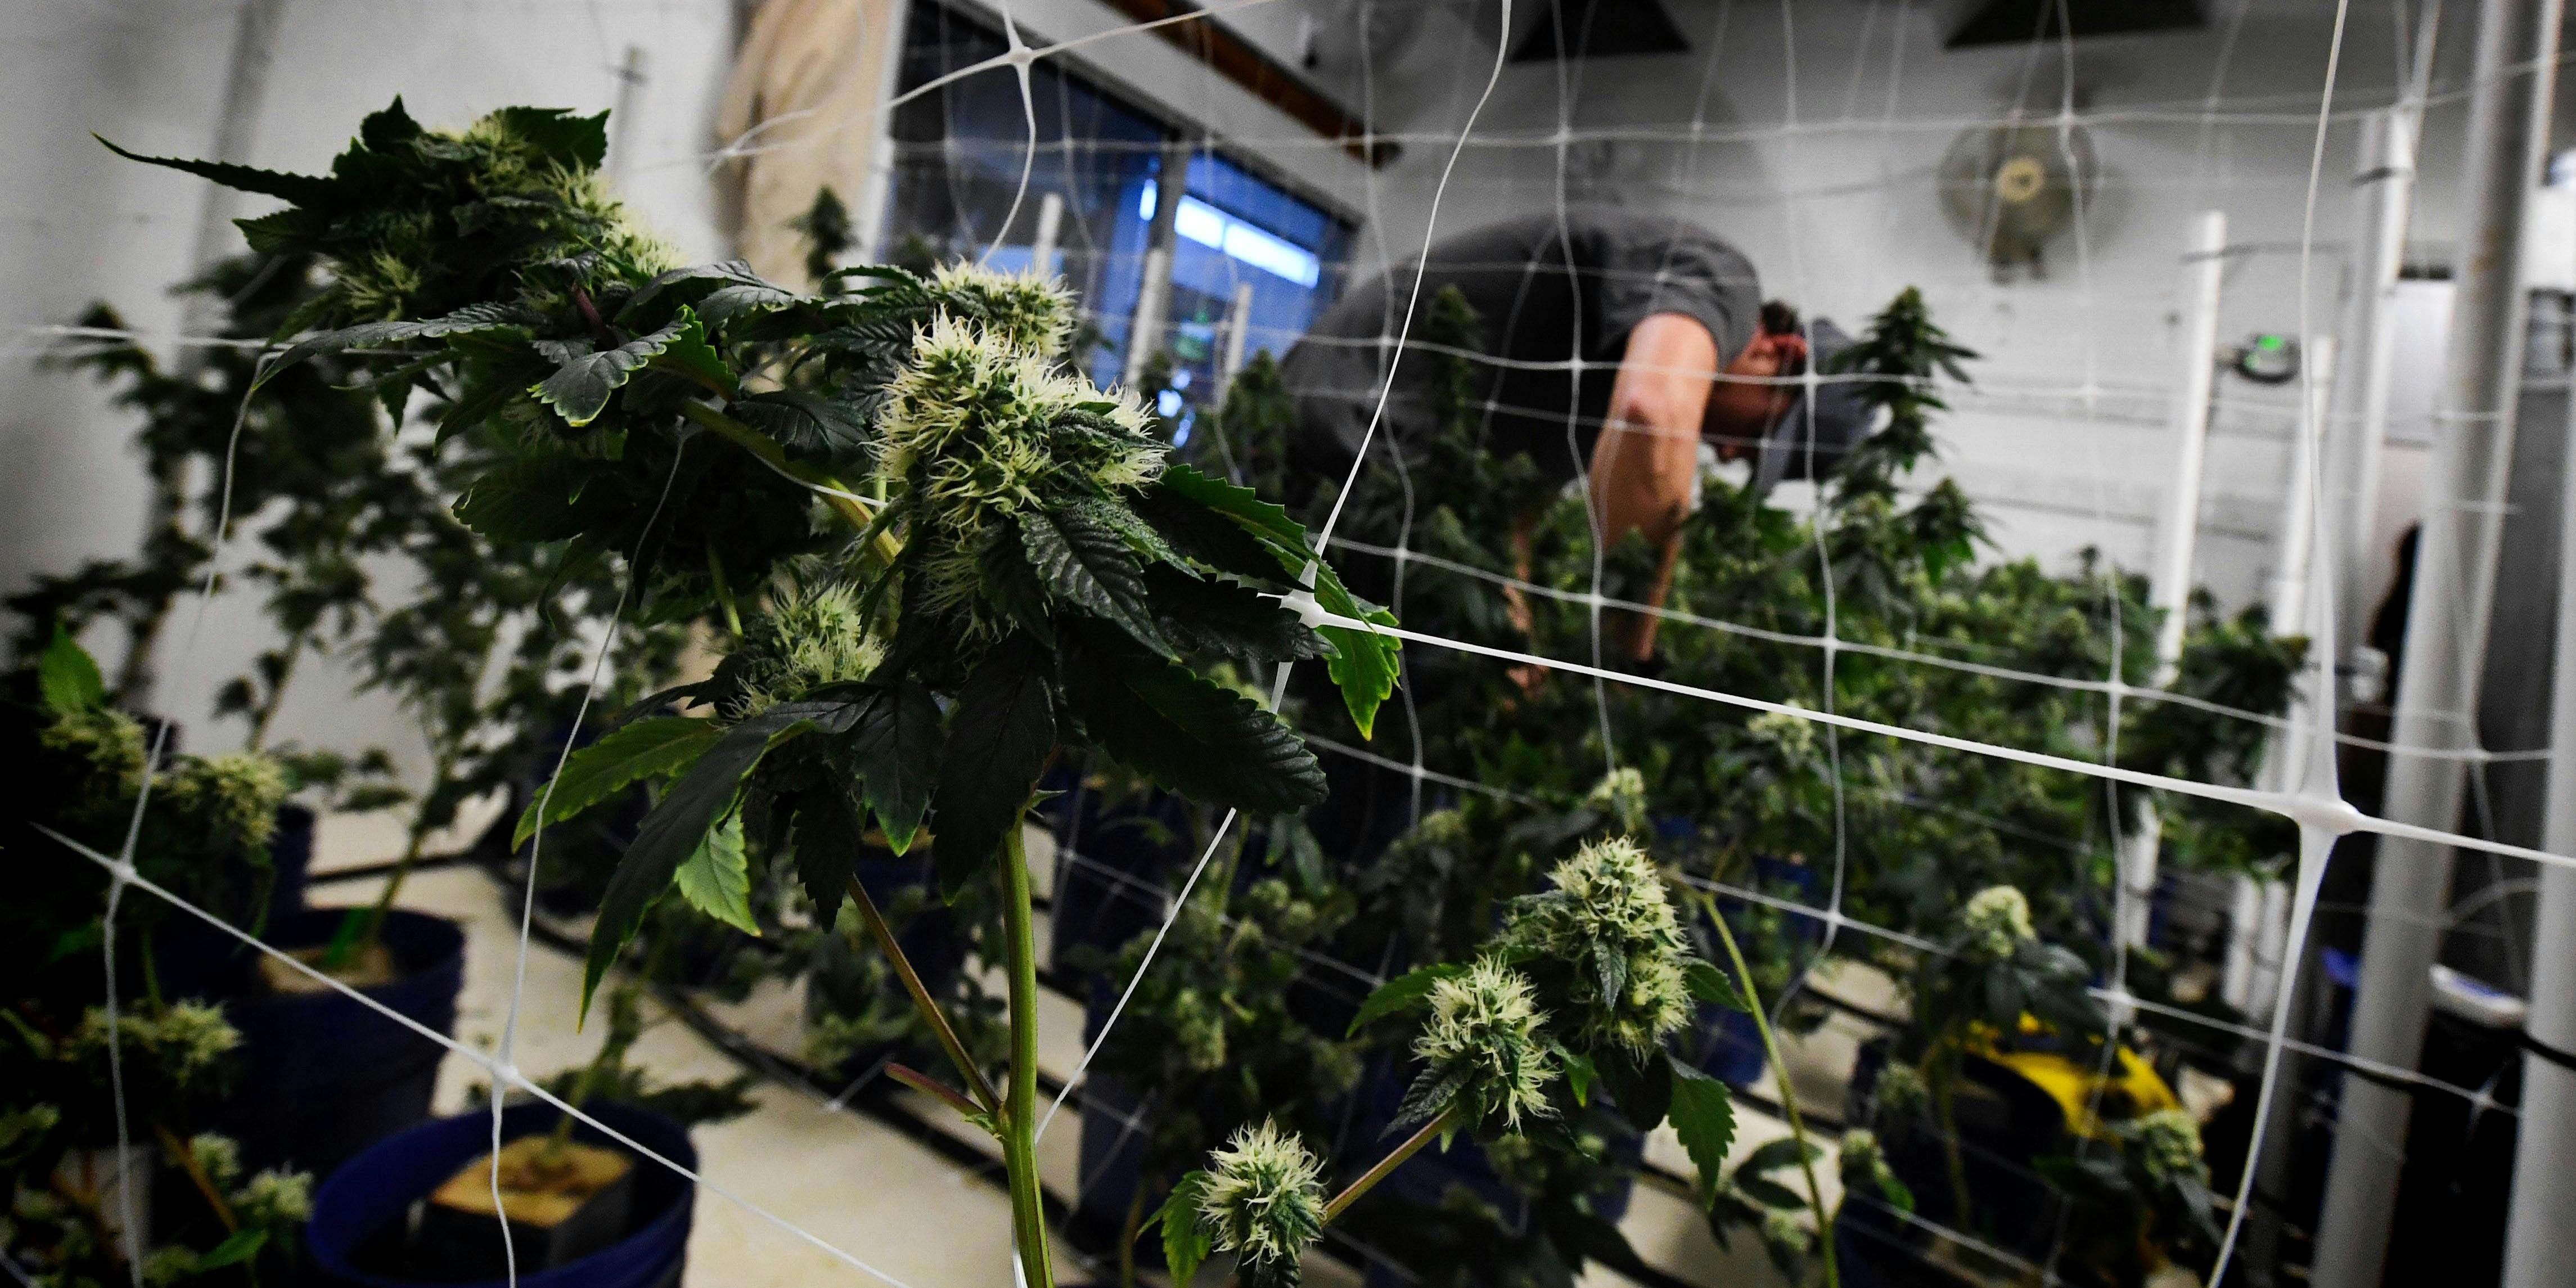 A worker tends to cannabis plants growing at the Perennial Holistic Wellness Center, a medicinal marijuana dispensary in Los Angeles, California, on March 24, 2017. (Photo by MARK RALSTON/AFP via Getty Images)